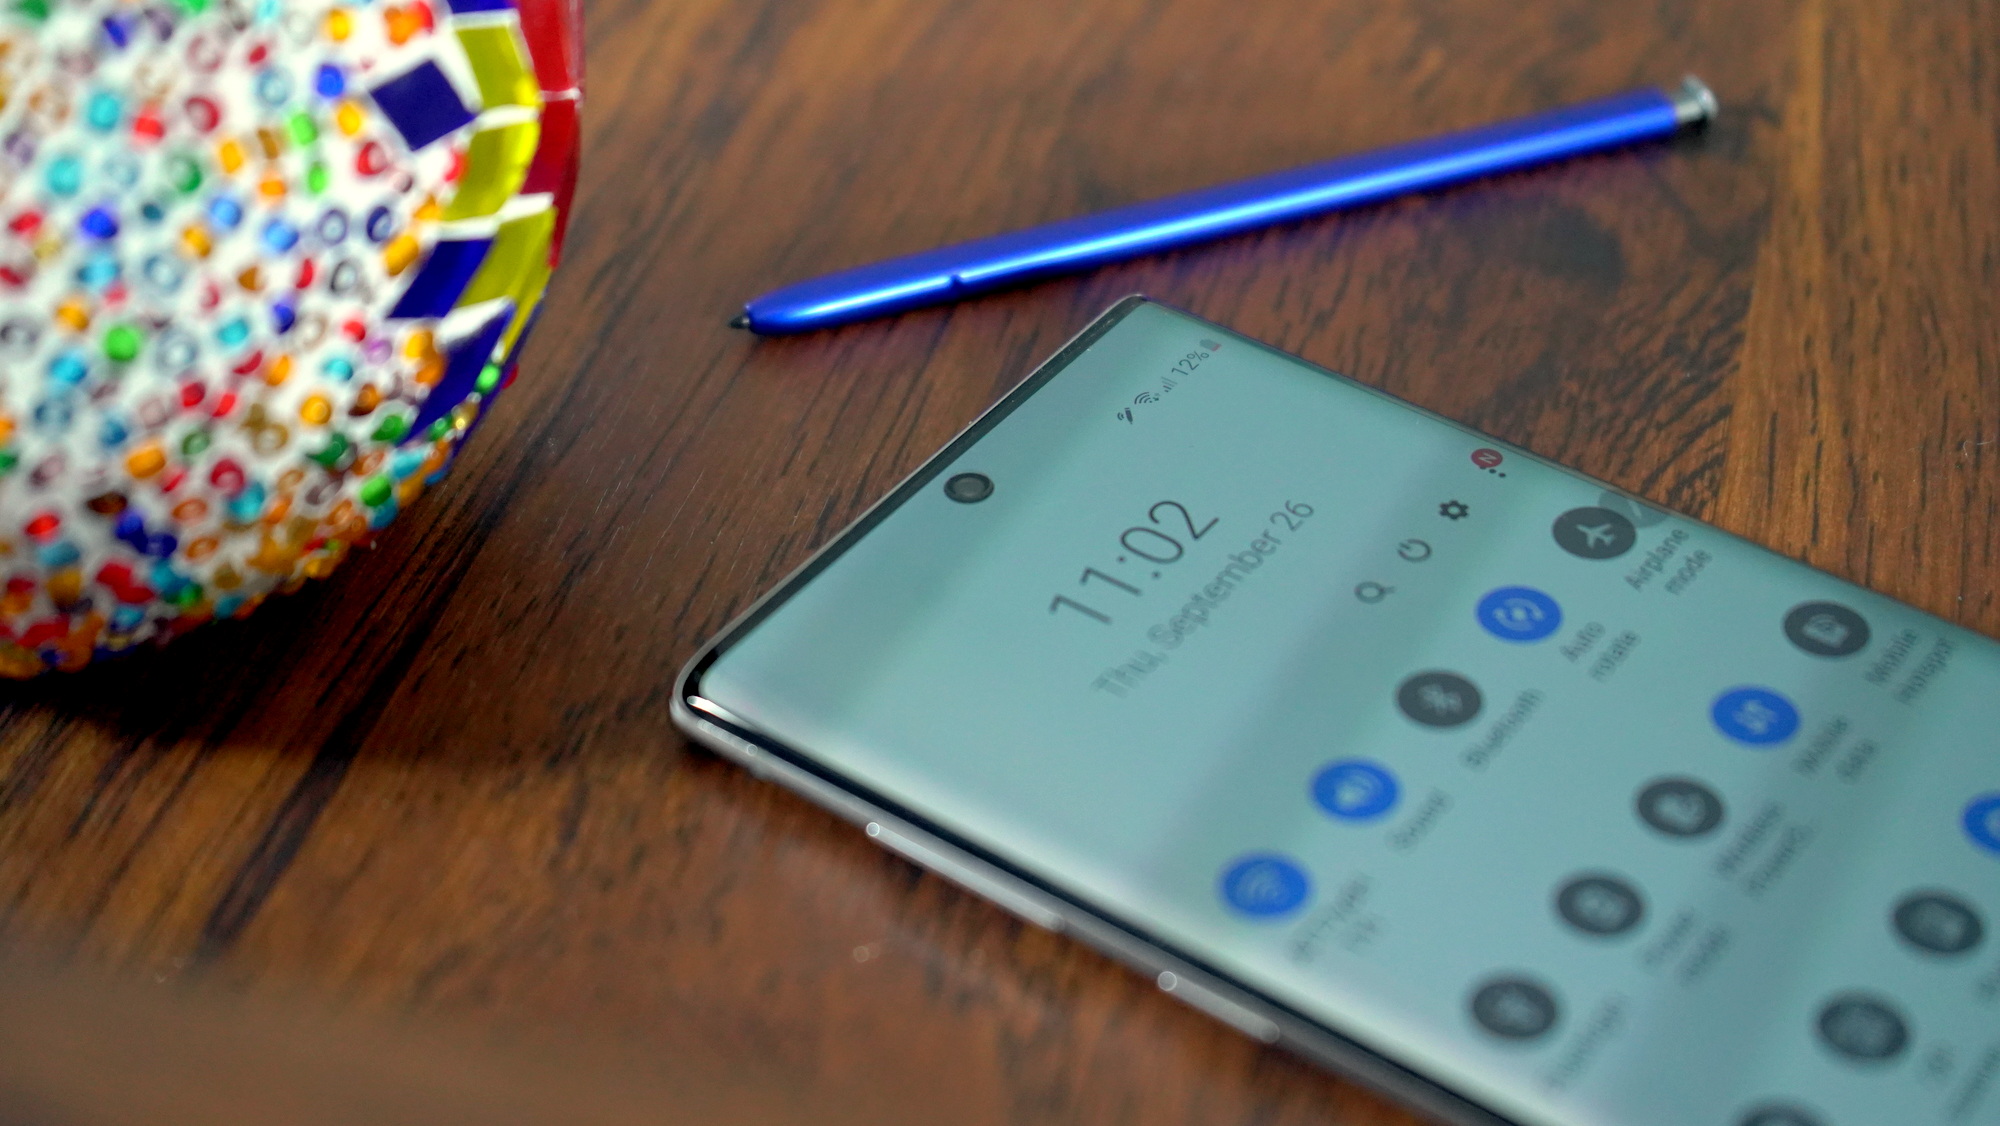 samsung galaxy note 10 12 - Samsung Galaxy Note 10 price in Nigeria and full specs